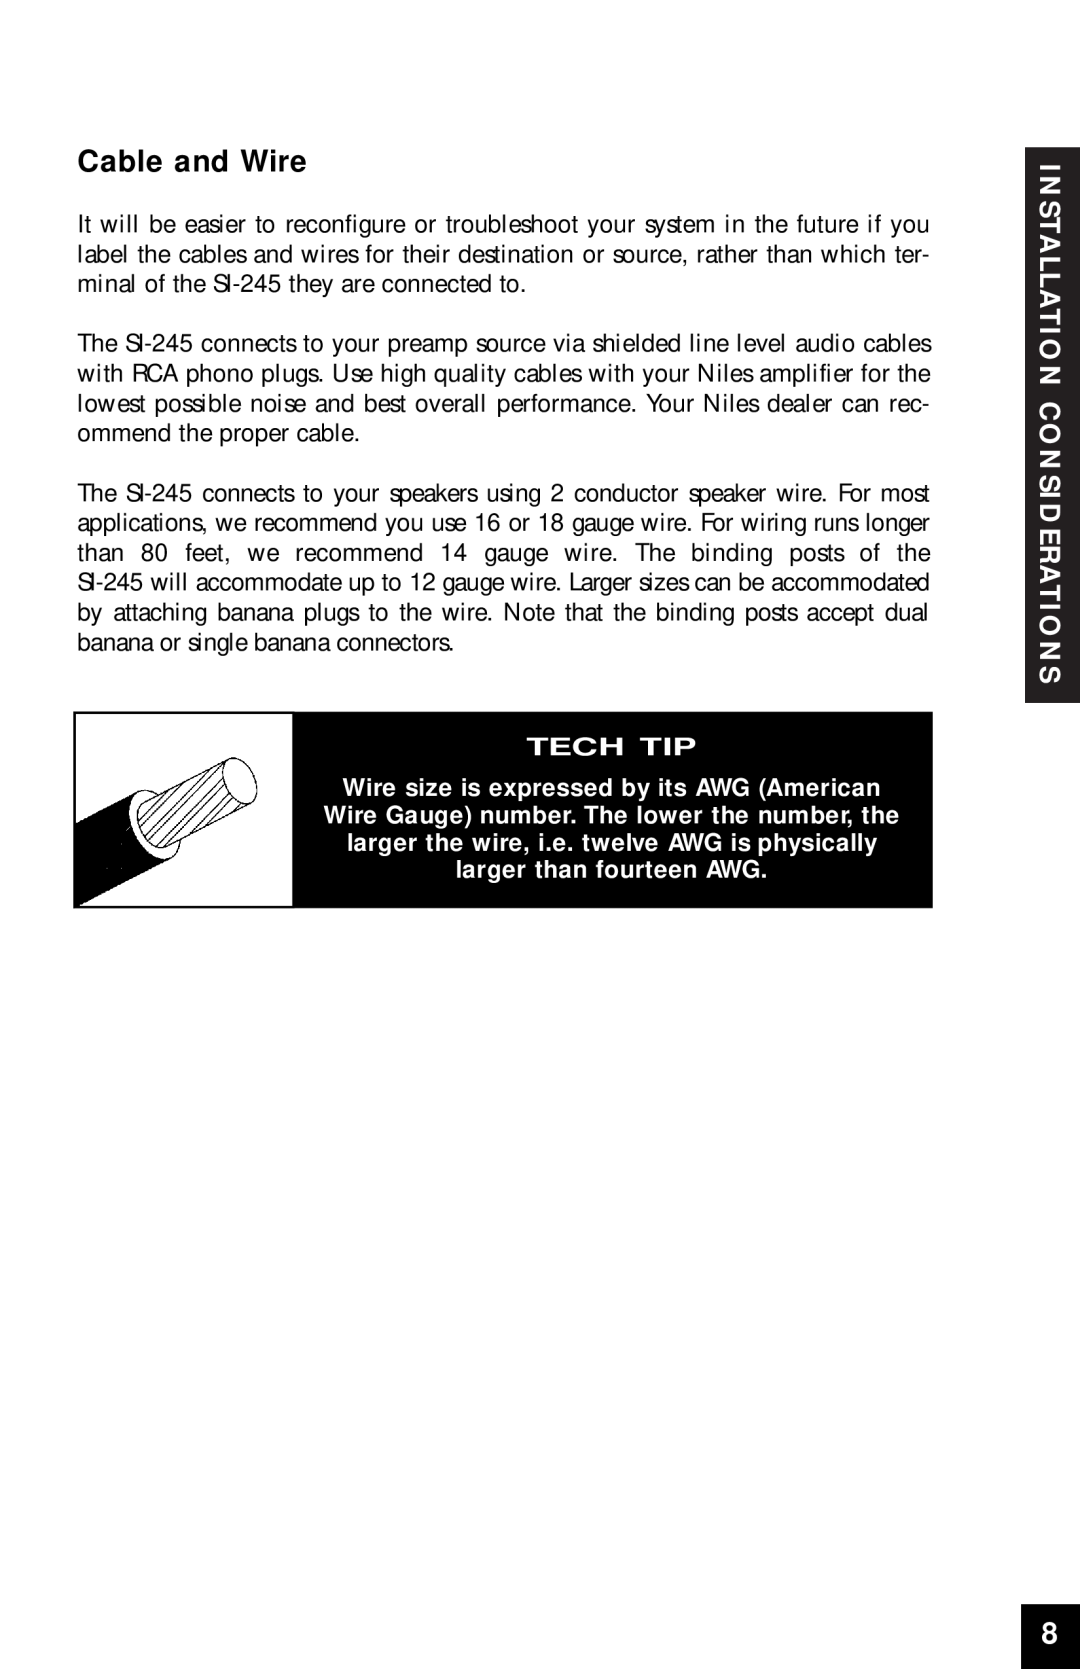 Niles Audio SI-245 manual Cable and Wire, Tech Tip, Installation Considerations 